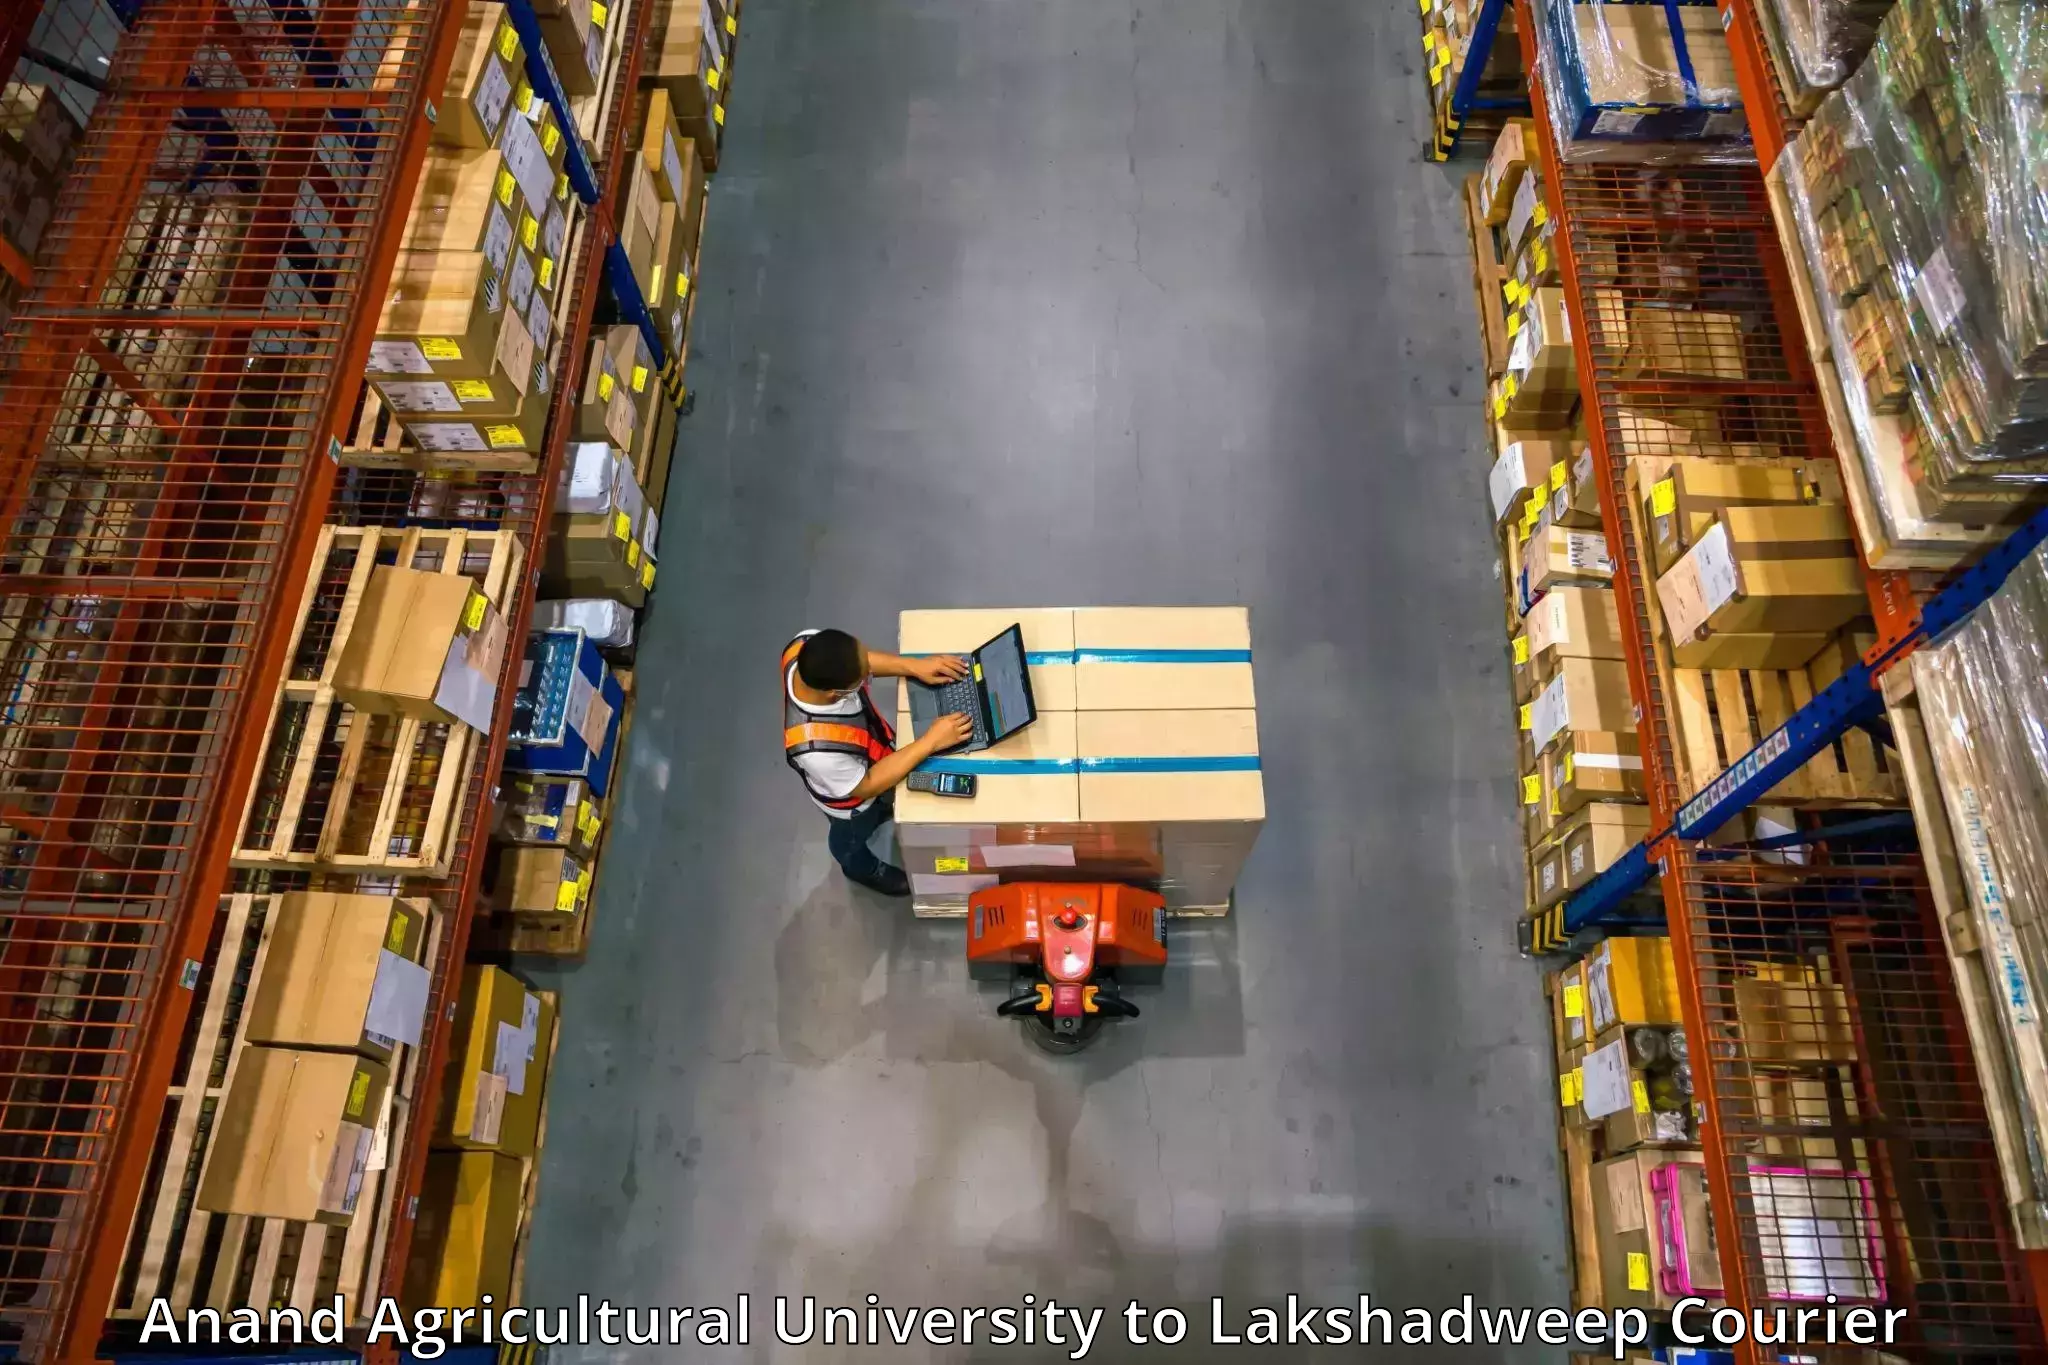 Professional moving assistance Anand Agricultural University to Lakshadweep